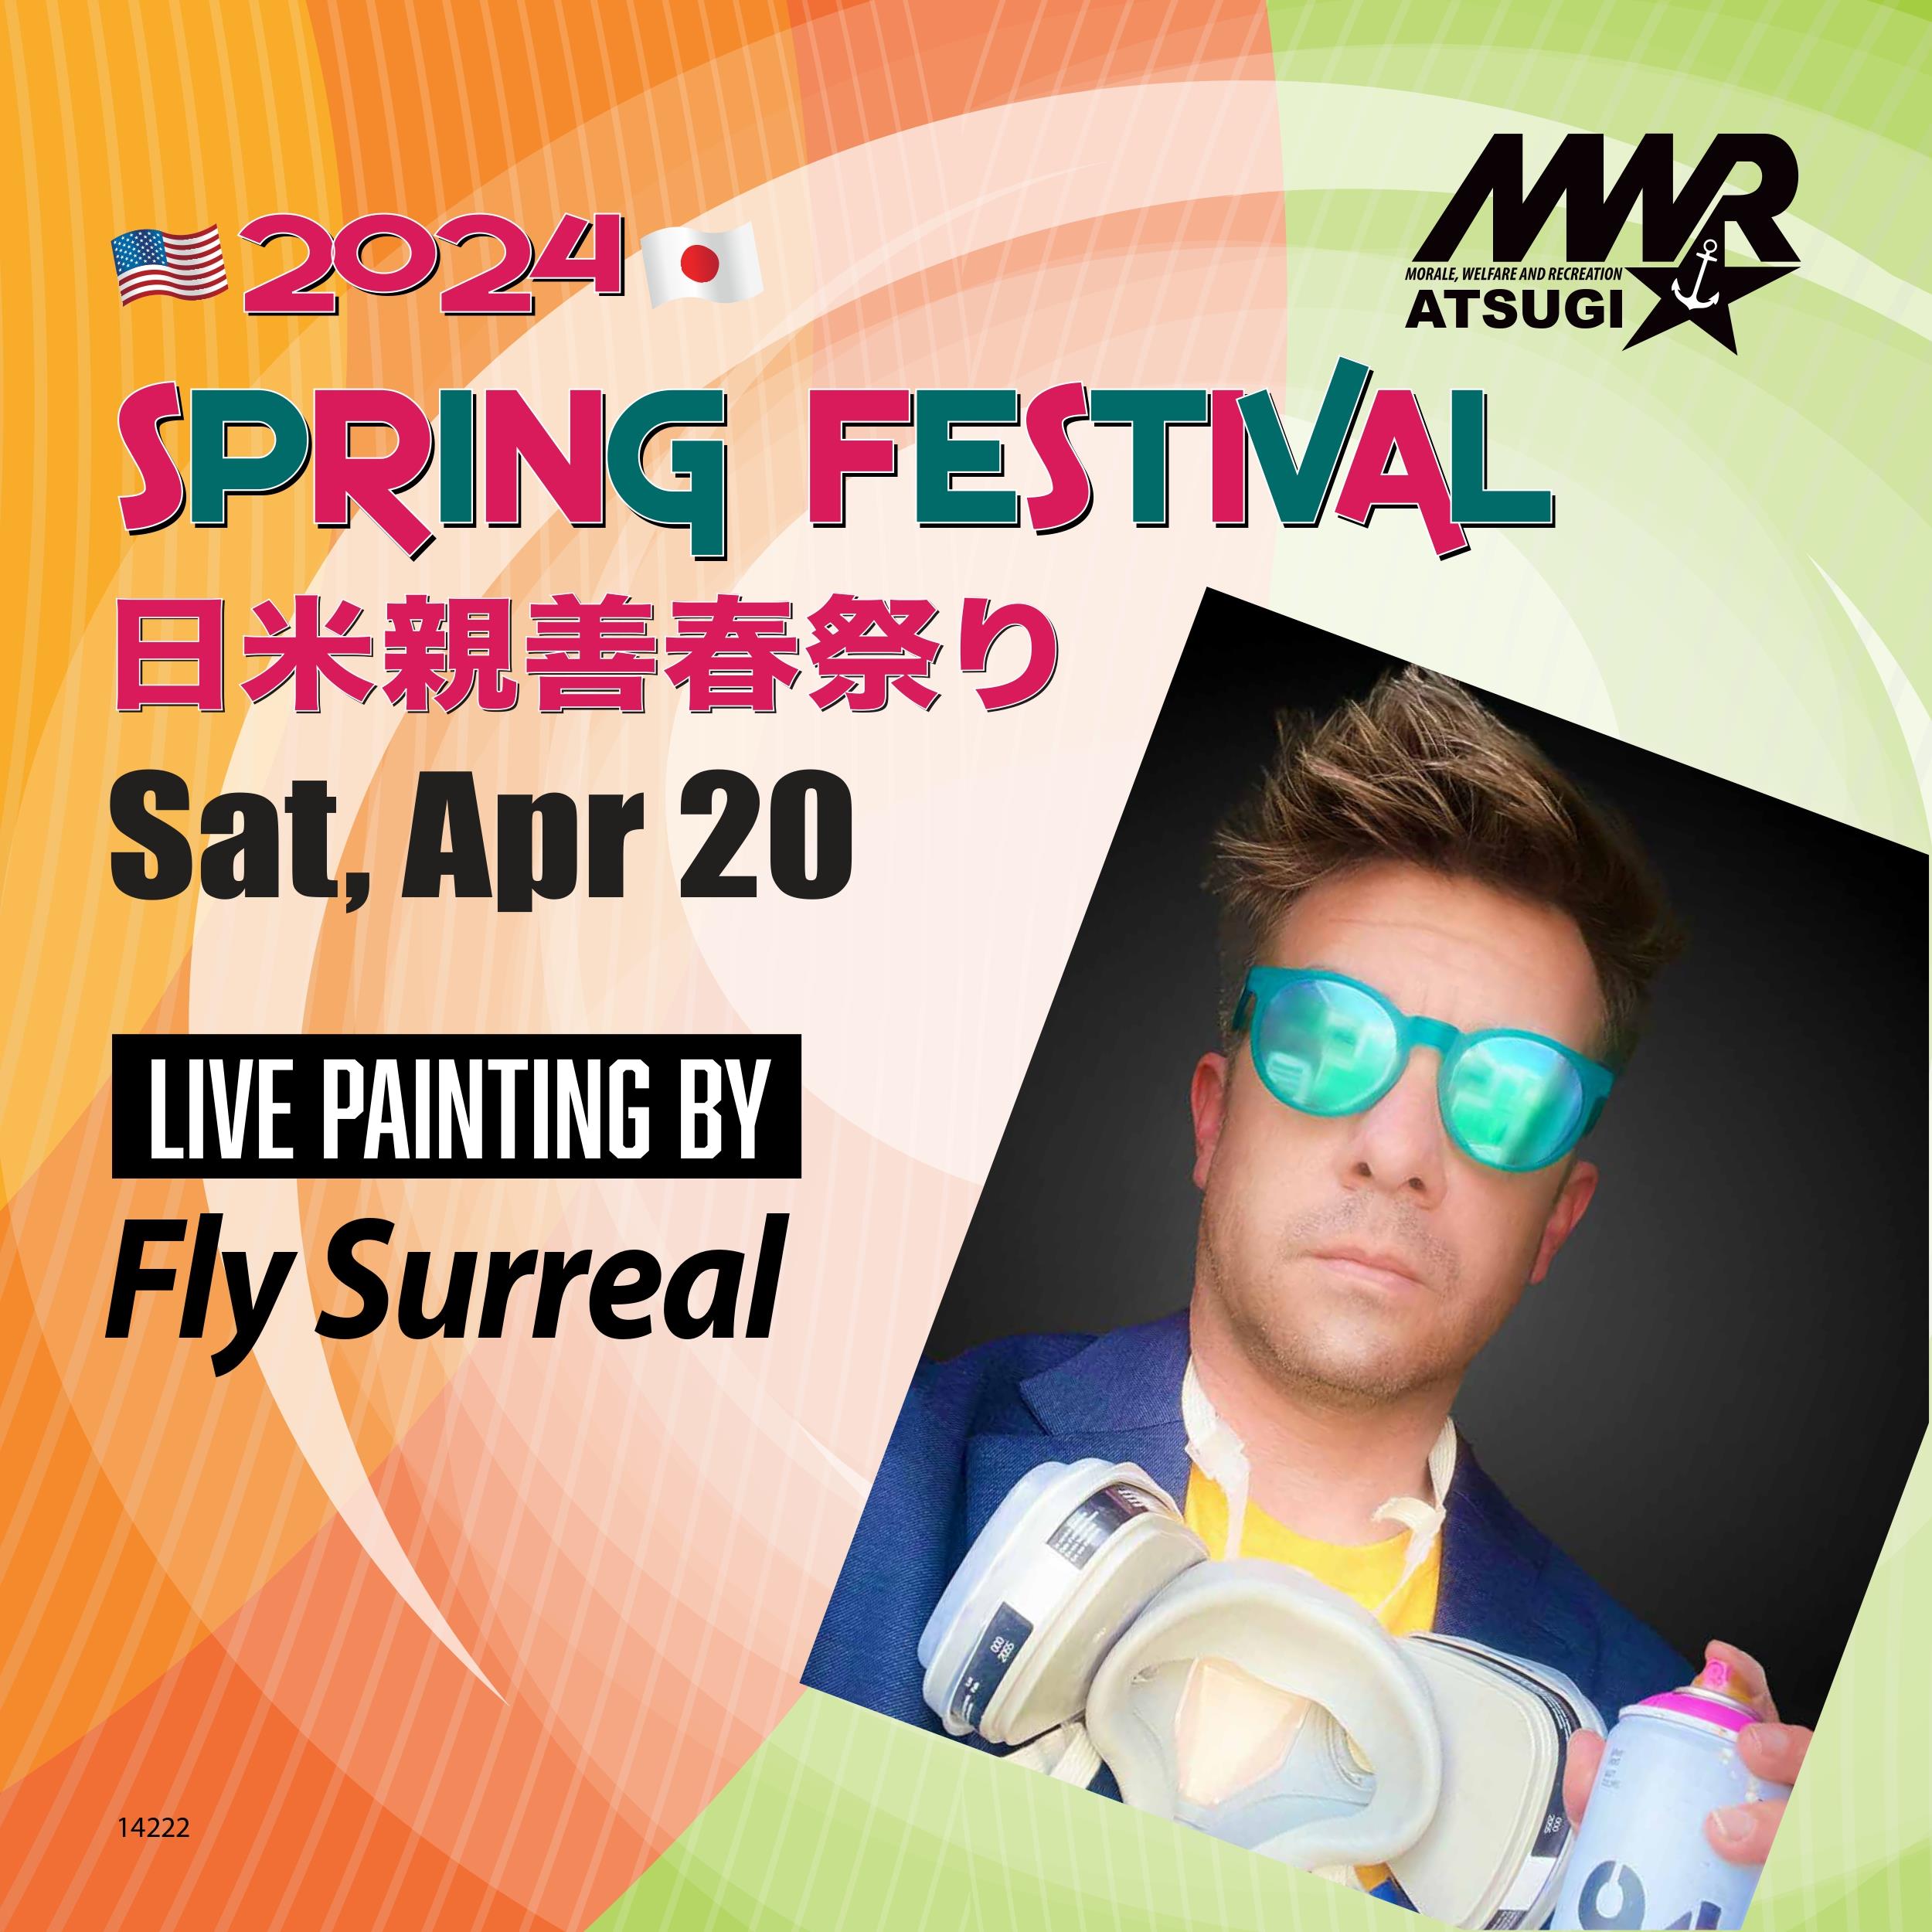 Fly Surreal at Spring Festival